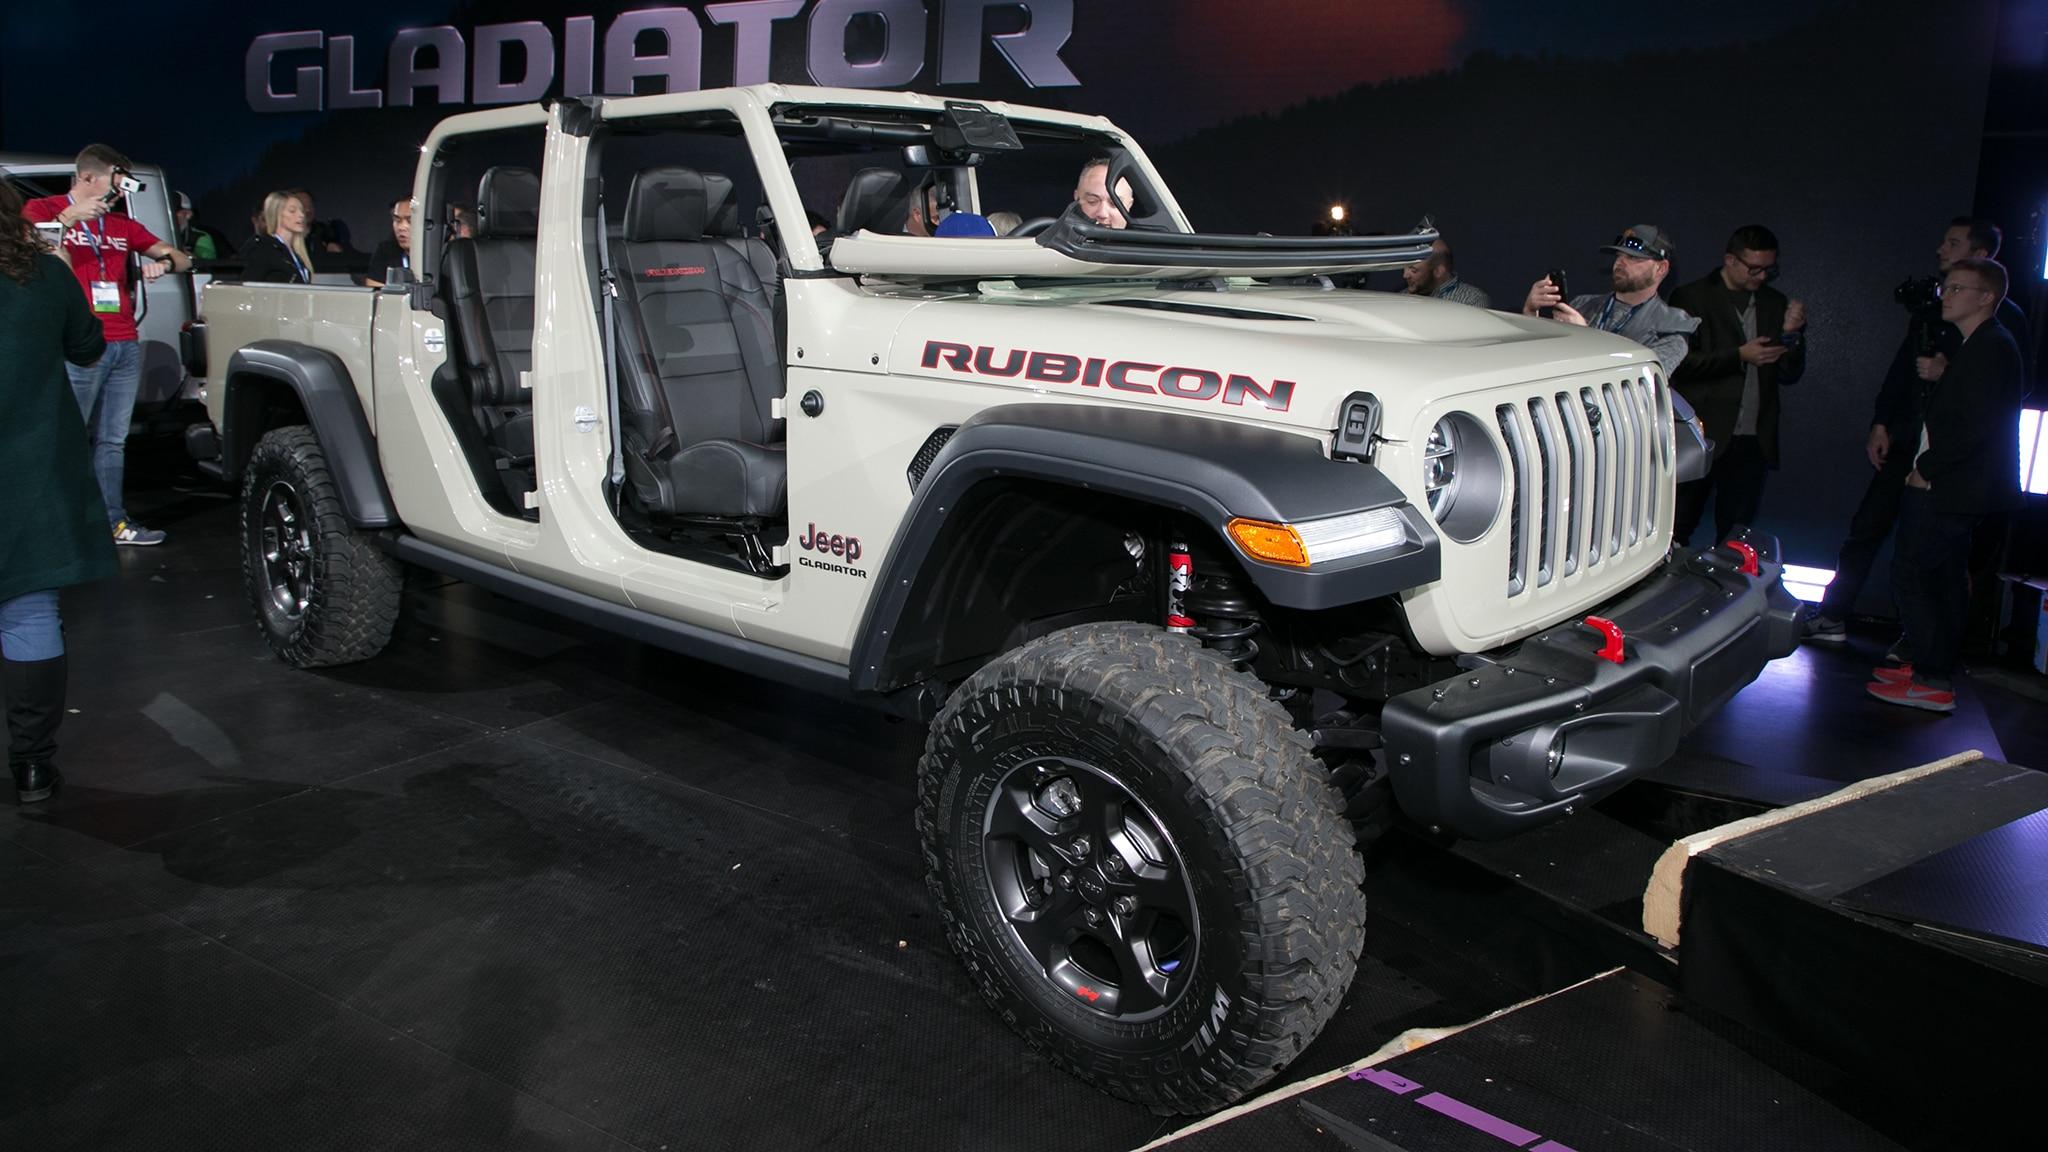 Jeep Gladiator Pickup Arrives: Here Are the Official